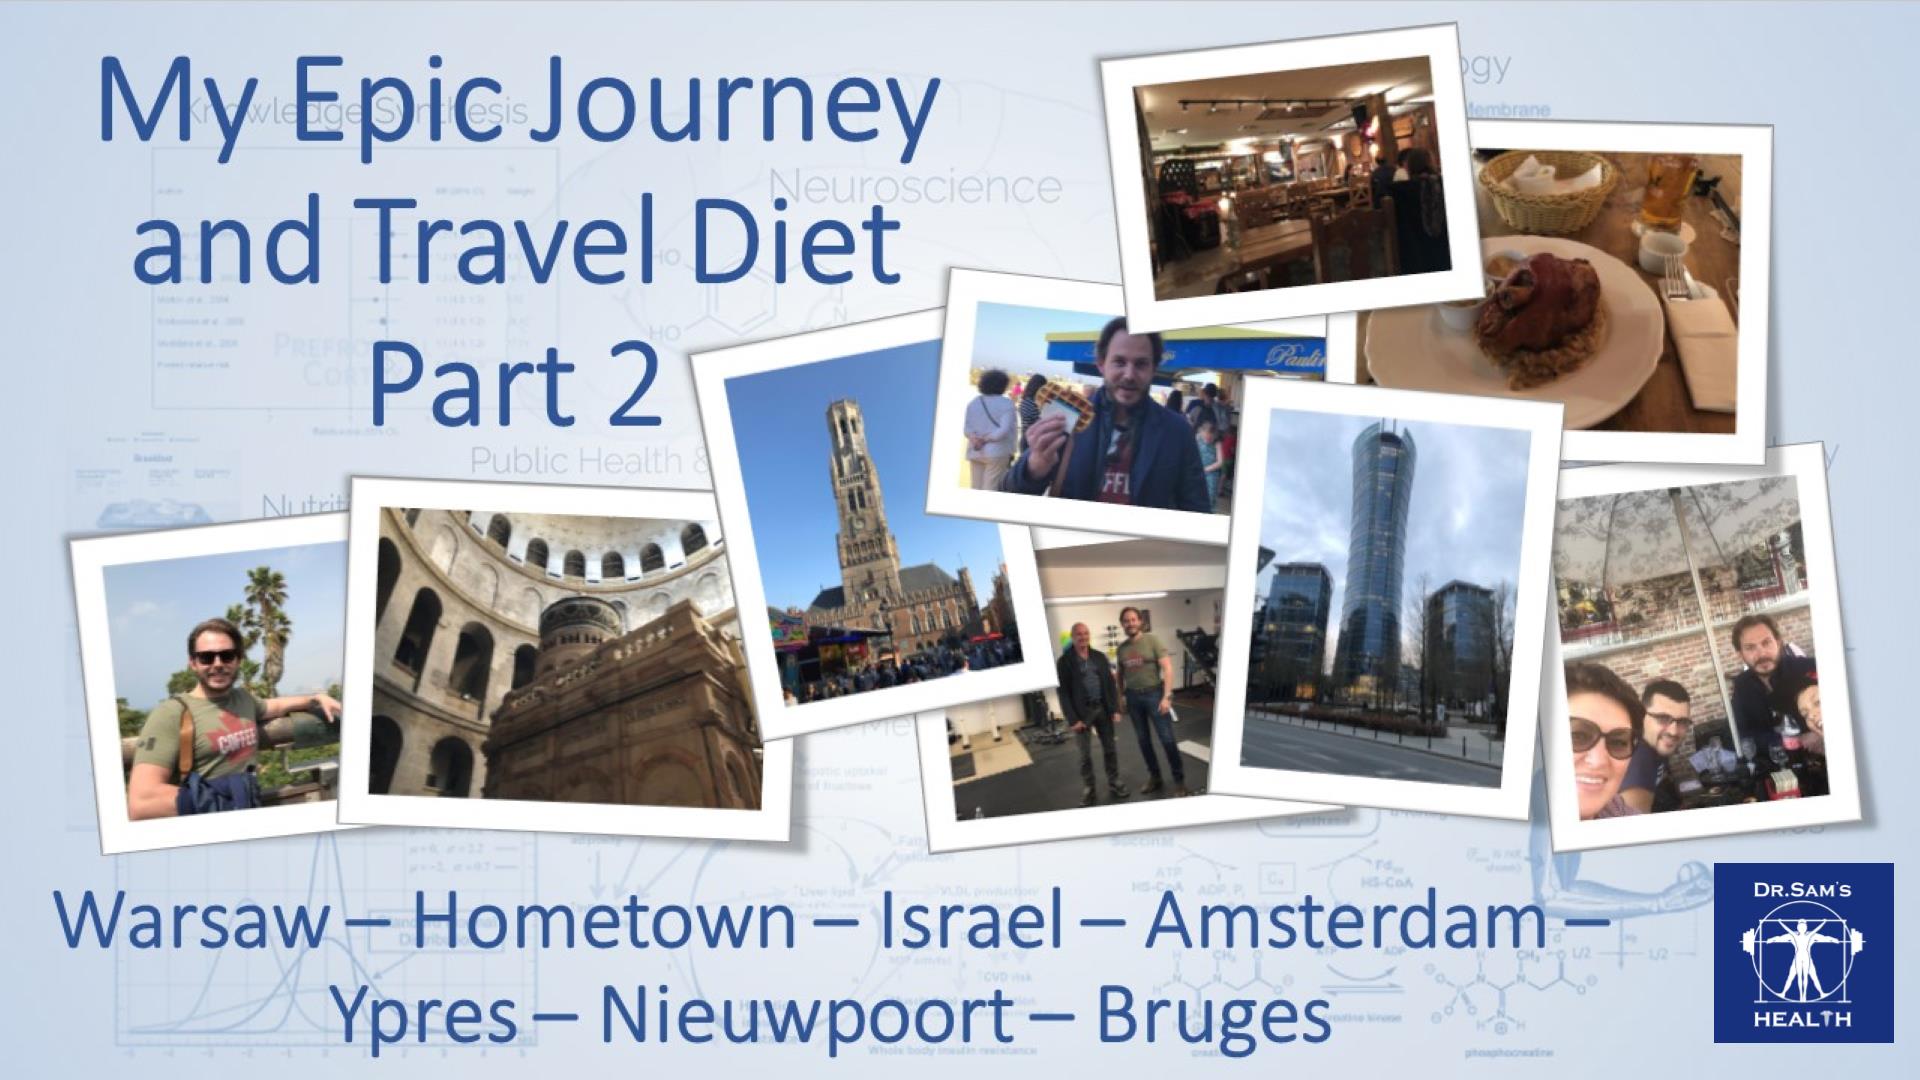 My Epic Journey and Travel Diet